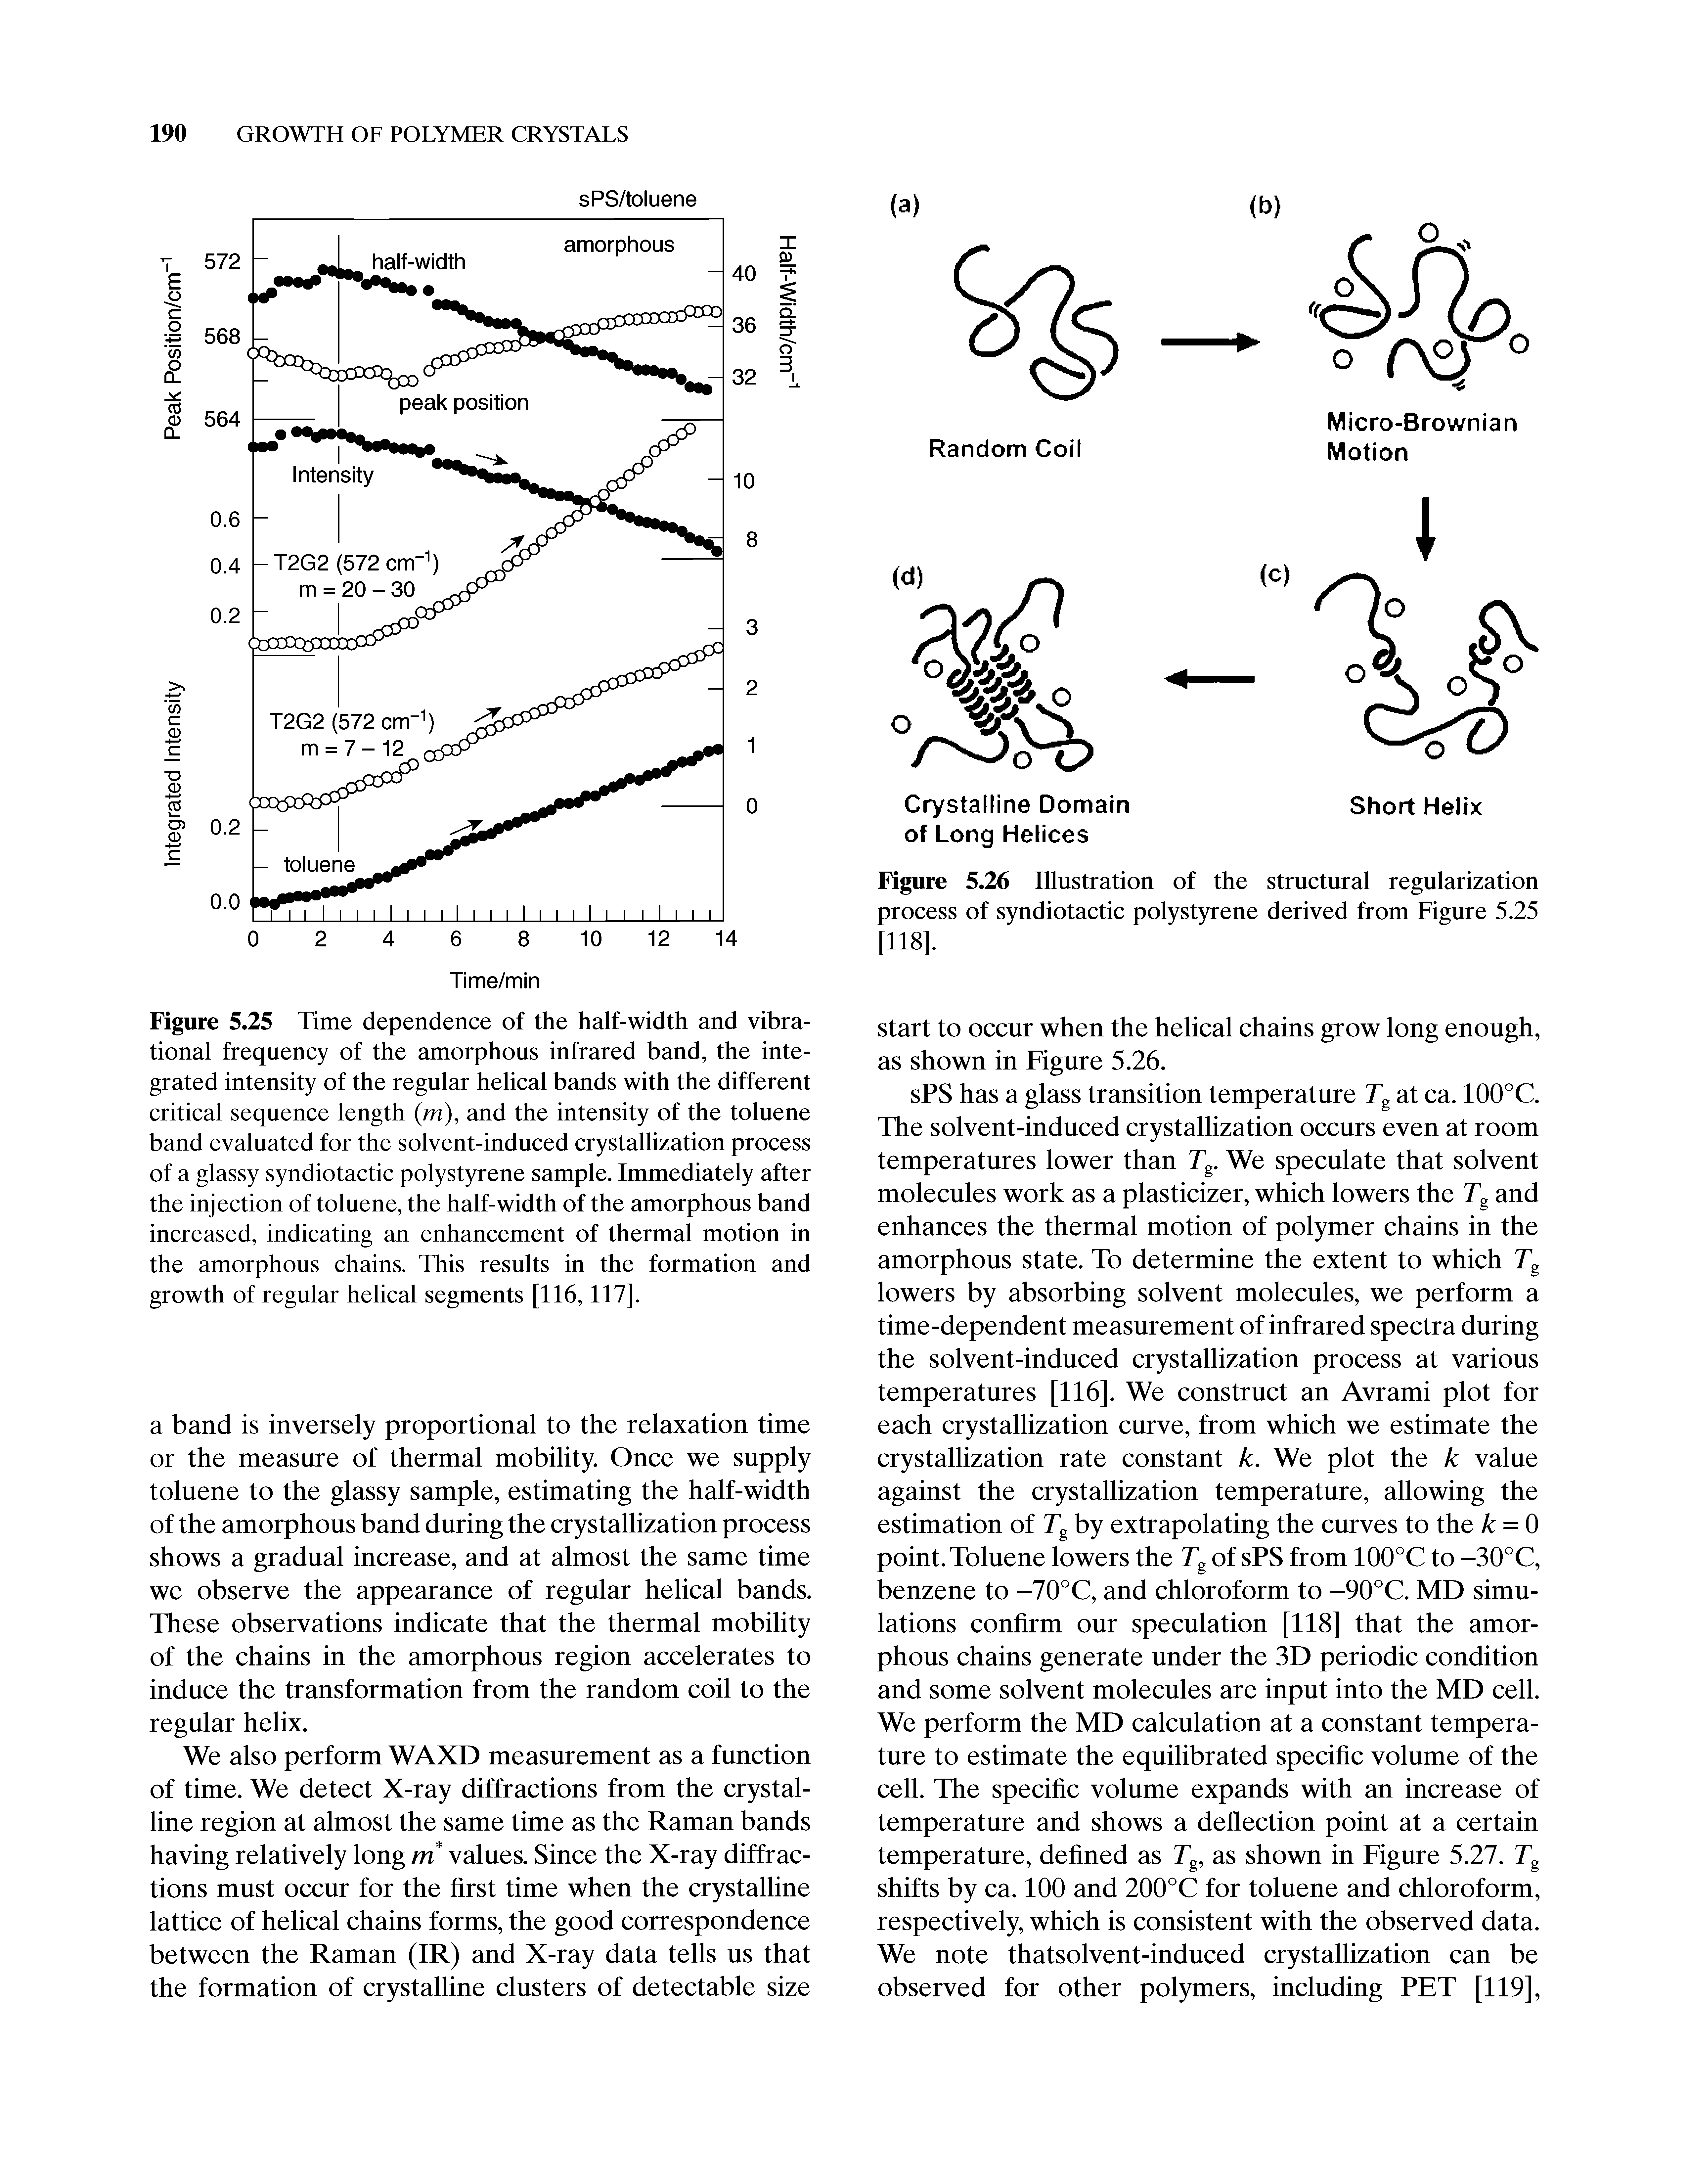 Figure 5.25 Time dependence of the half-width and vibrational frequency of the amorphous infrared band, the integrated intensity of the regular helical bands with the different critical sequence length (m), and the intensity of the toluene band evaluated for the solvent-induced crystallization process of a glassy syndiotactic polystyrene sample. Immediately after the injection of toluene, the half-width of the amorphous band increased, indicating an enhancement of thermal motion in the amorphous chains. This results in the formation and growth of regular helical segments [116,117].